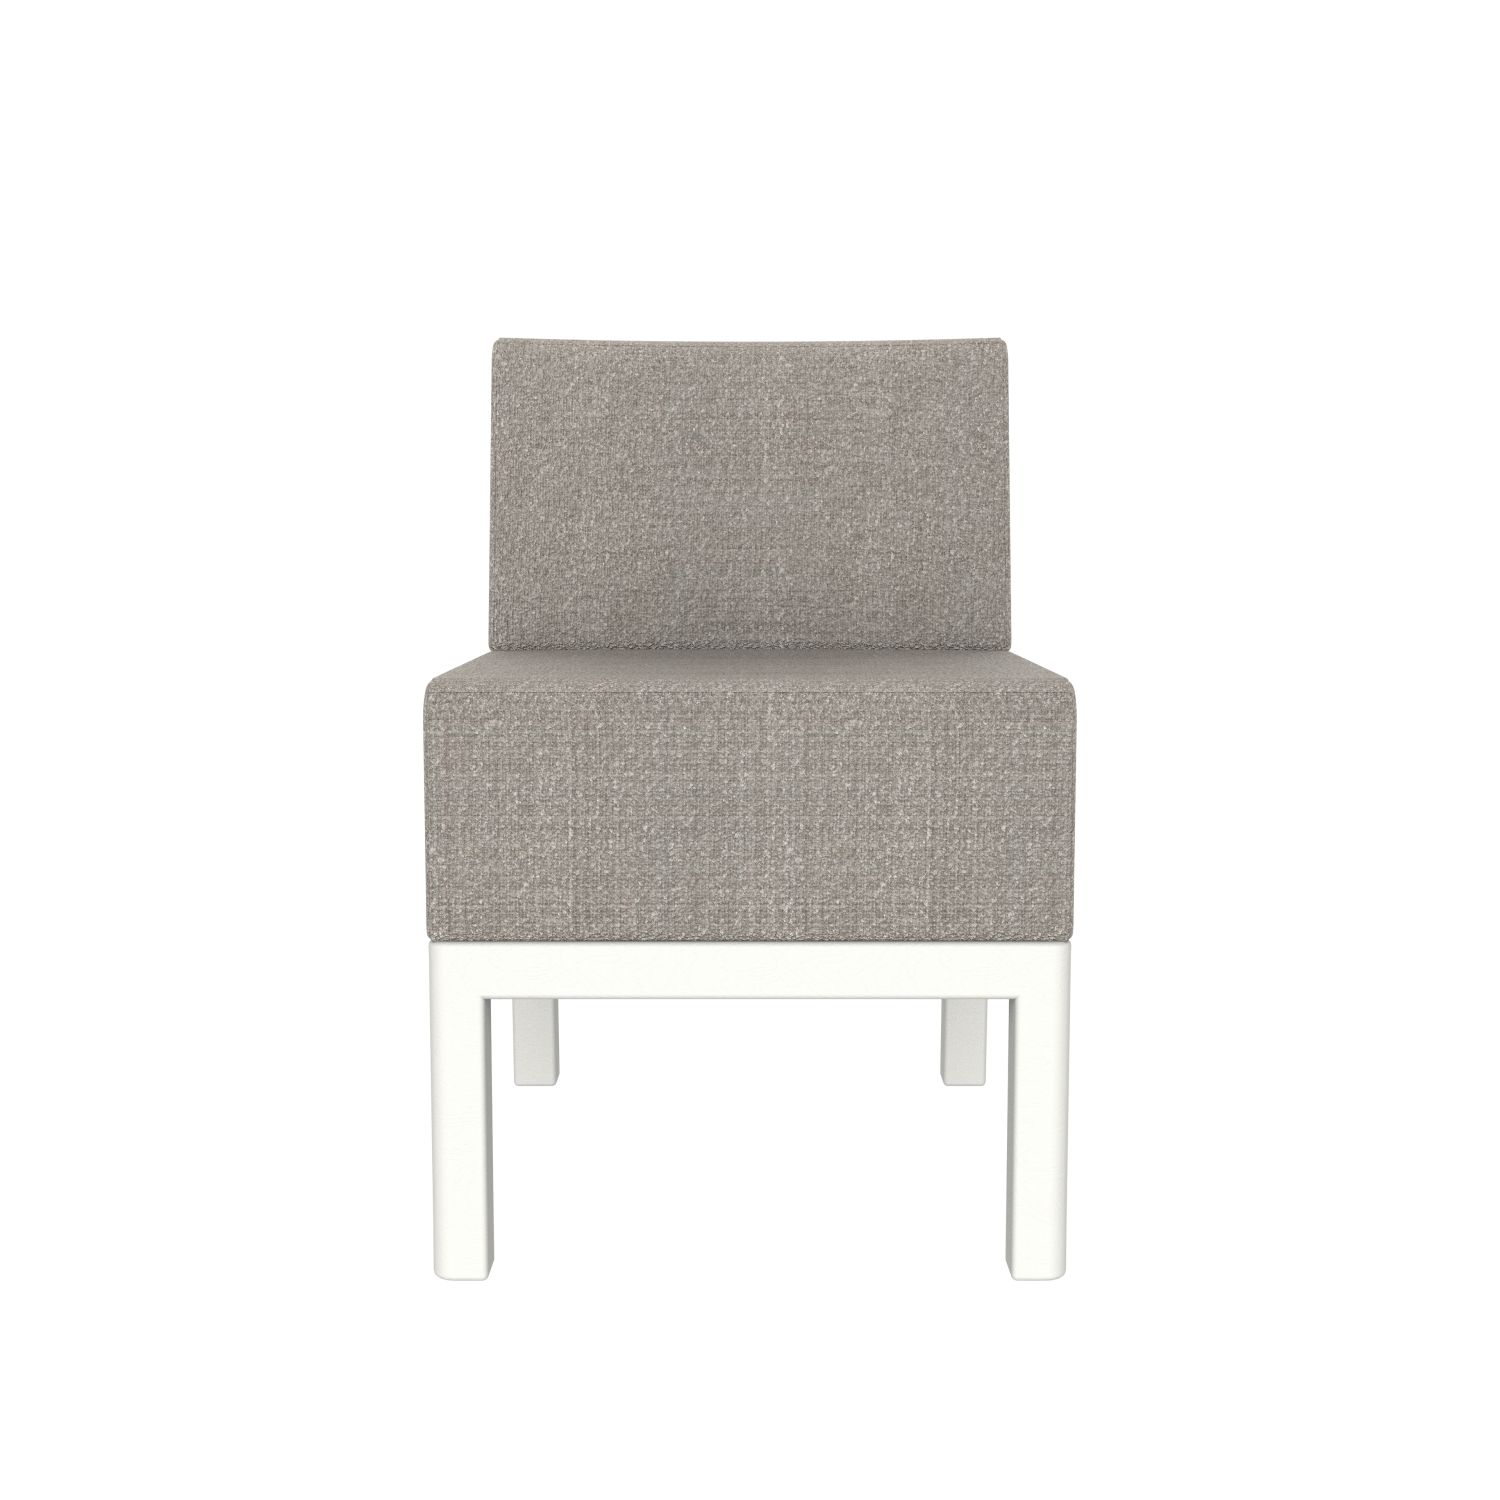 lensvelt piet boon chair 01 without armrests breeze light grey 171 price level 1 signal white 9003 hard leg ends